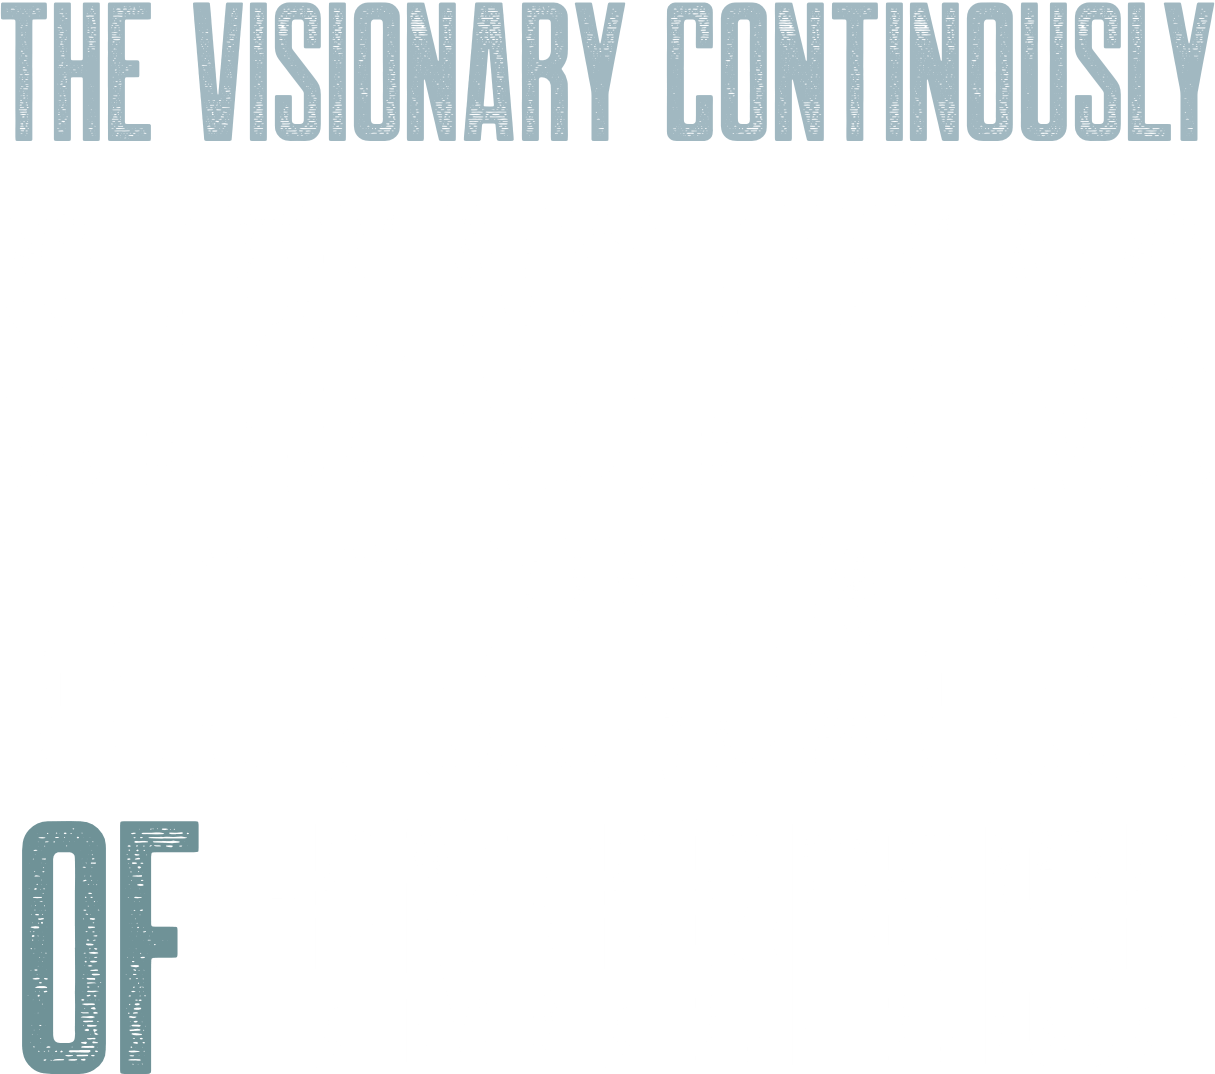 The Visionary Continuously Strengthens the vessel